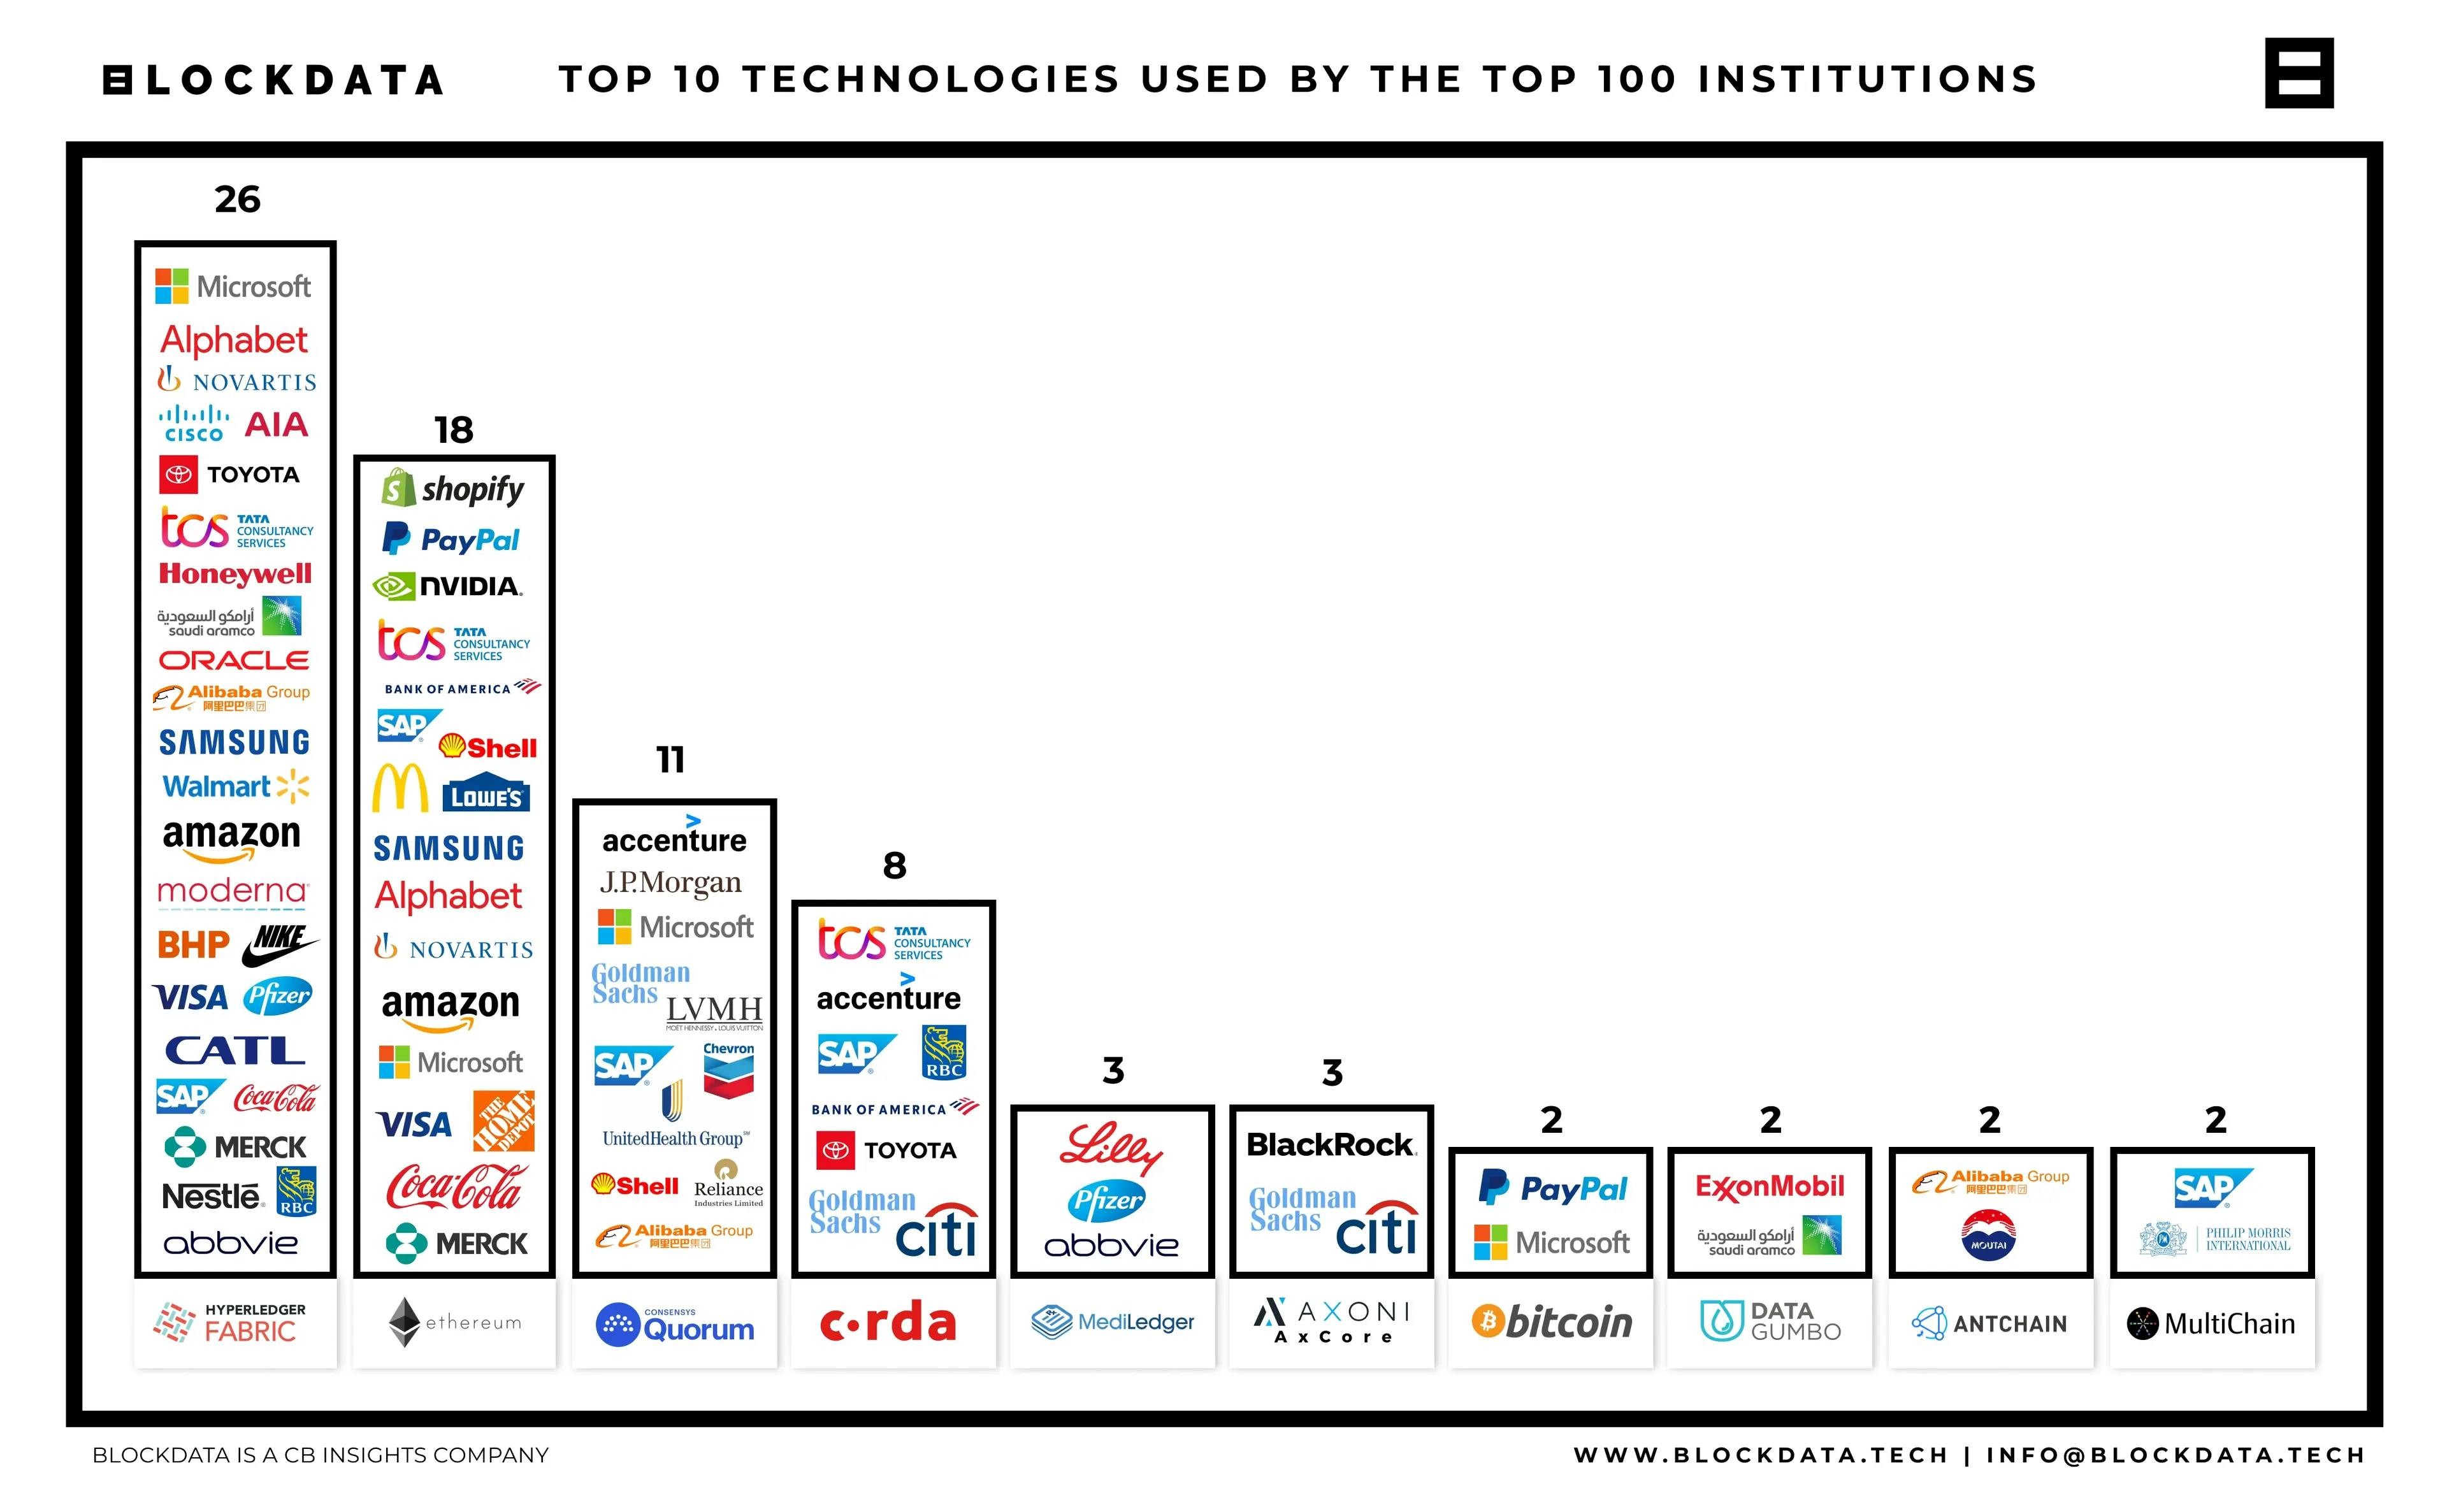 Top 10 technologies used by the top 100 institutions